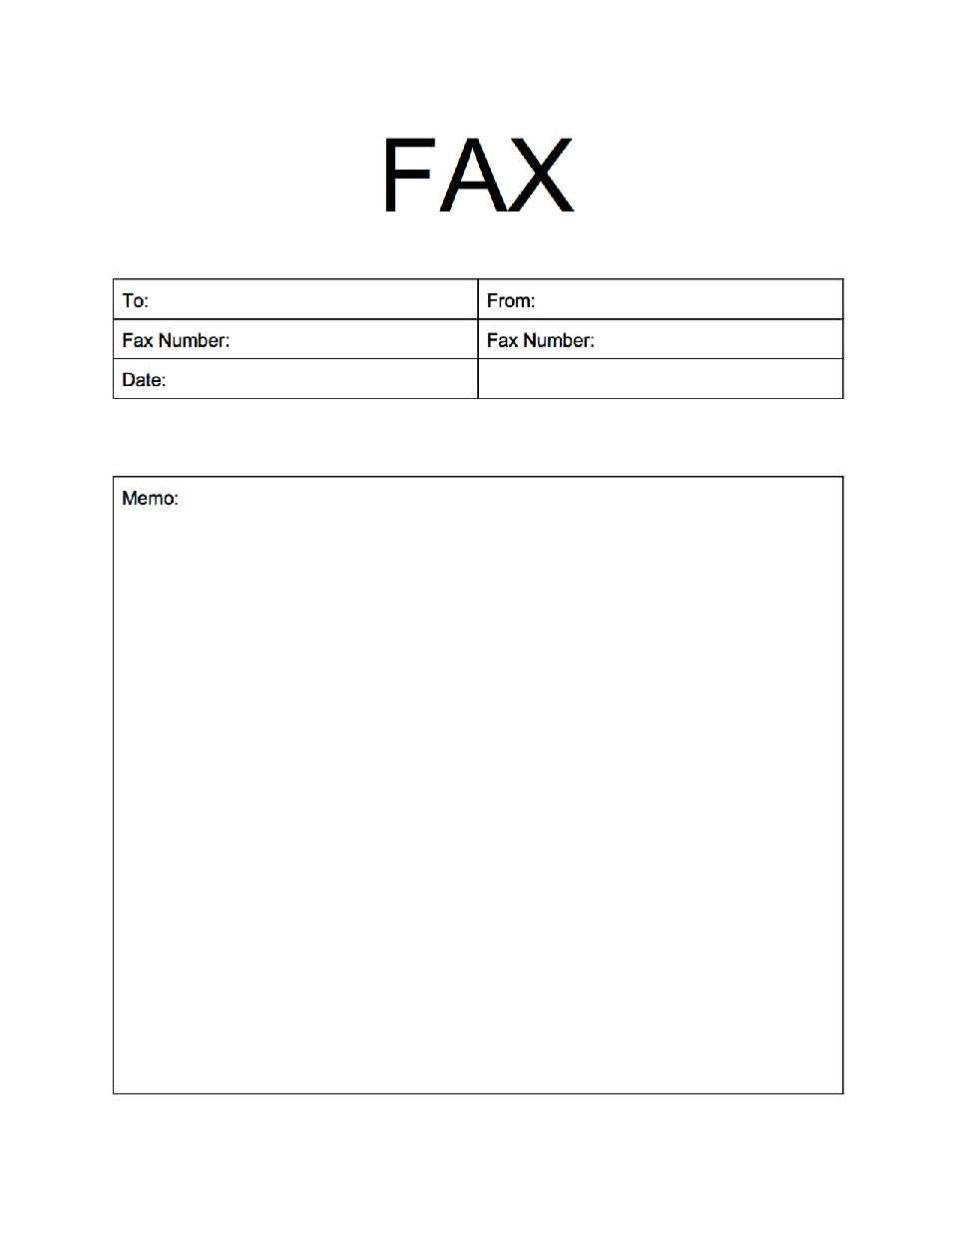 Fax cover sheet Word Archives - [Free]^^ Fax Cover Sheet Template Intended For Fax Cover Sheet Template Word 2010